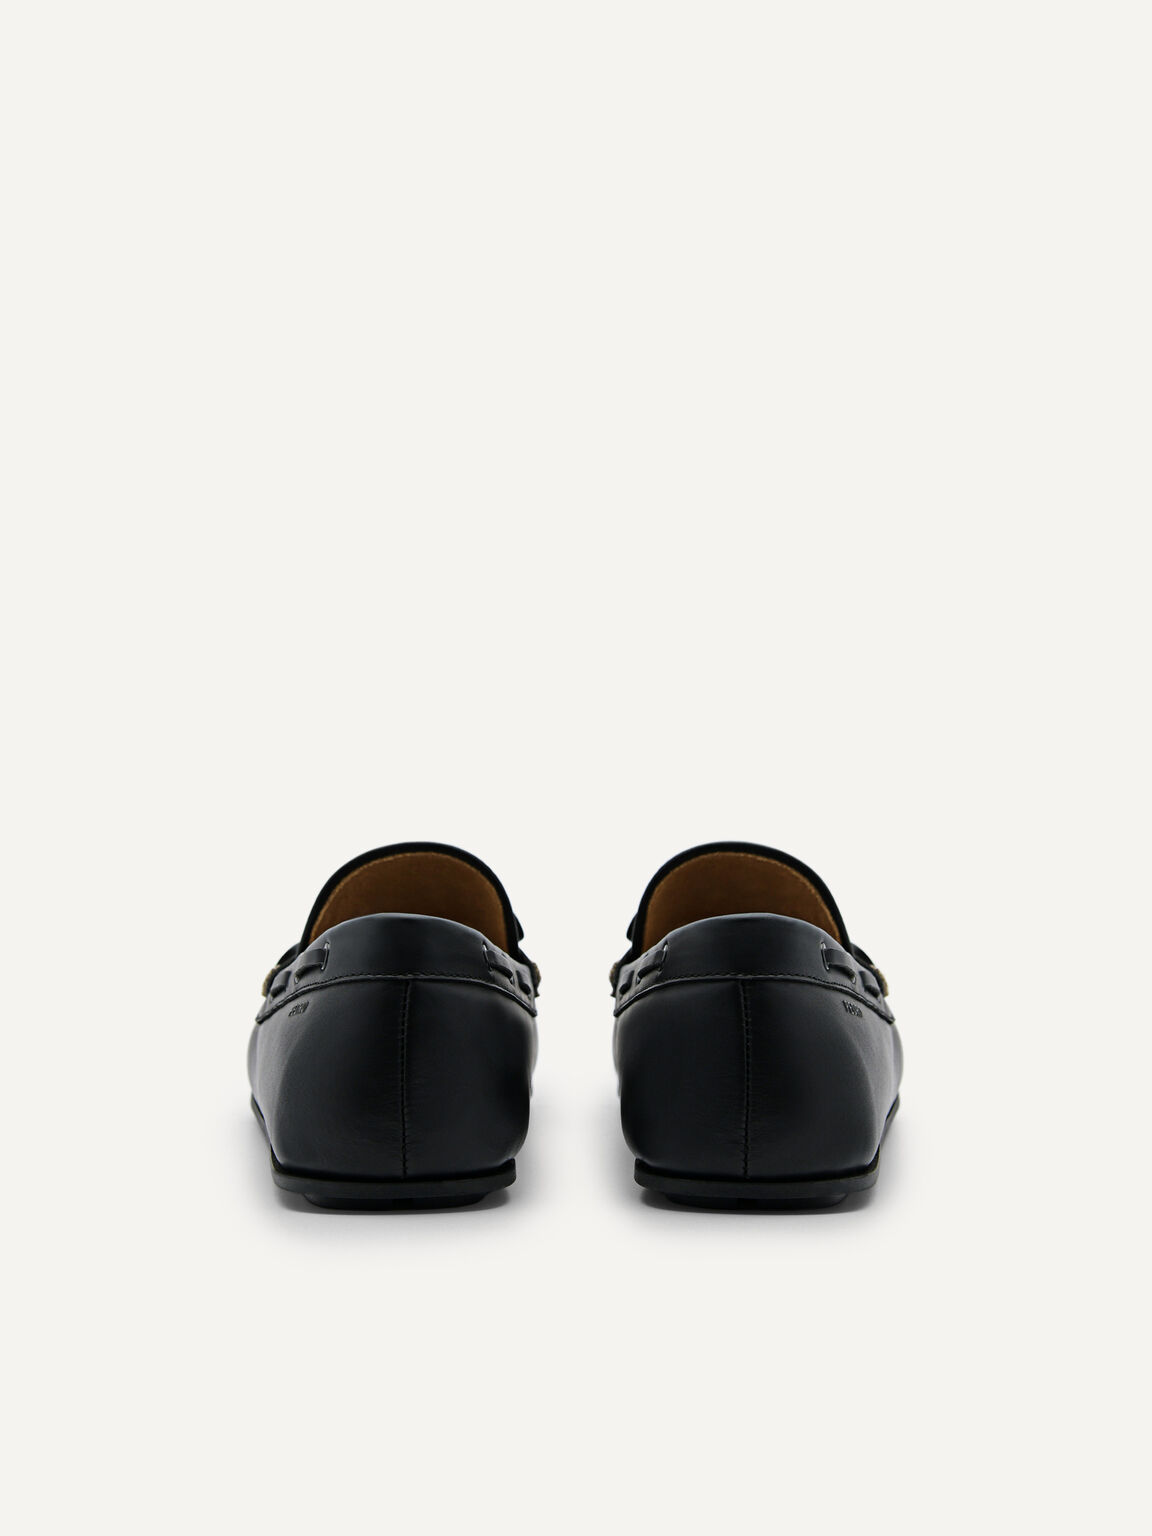 Leather Bow Moccasins, Black